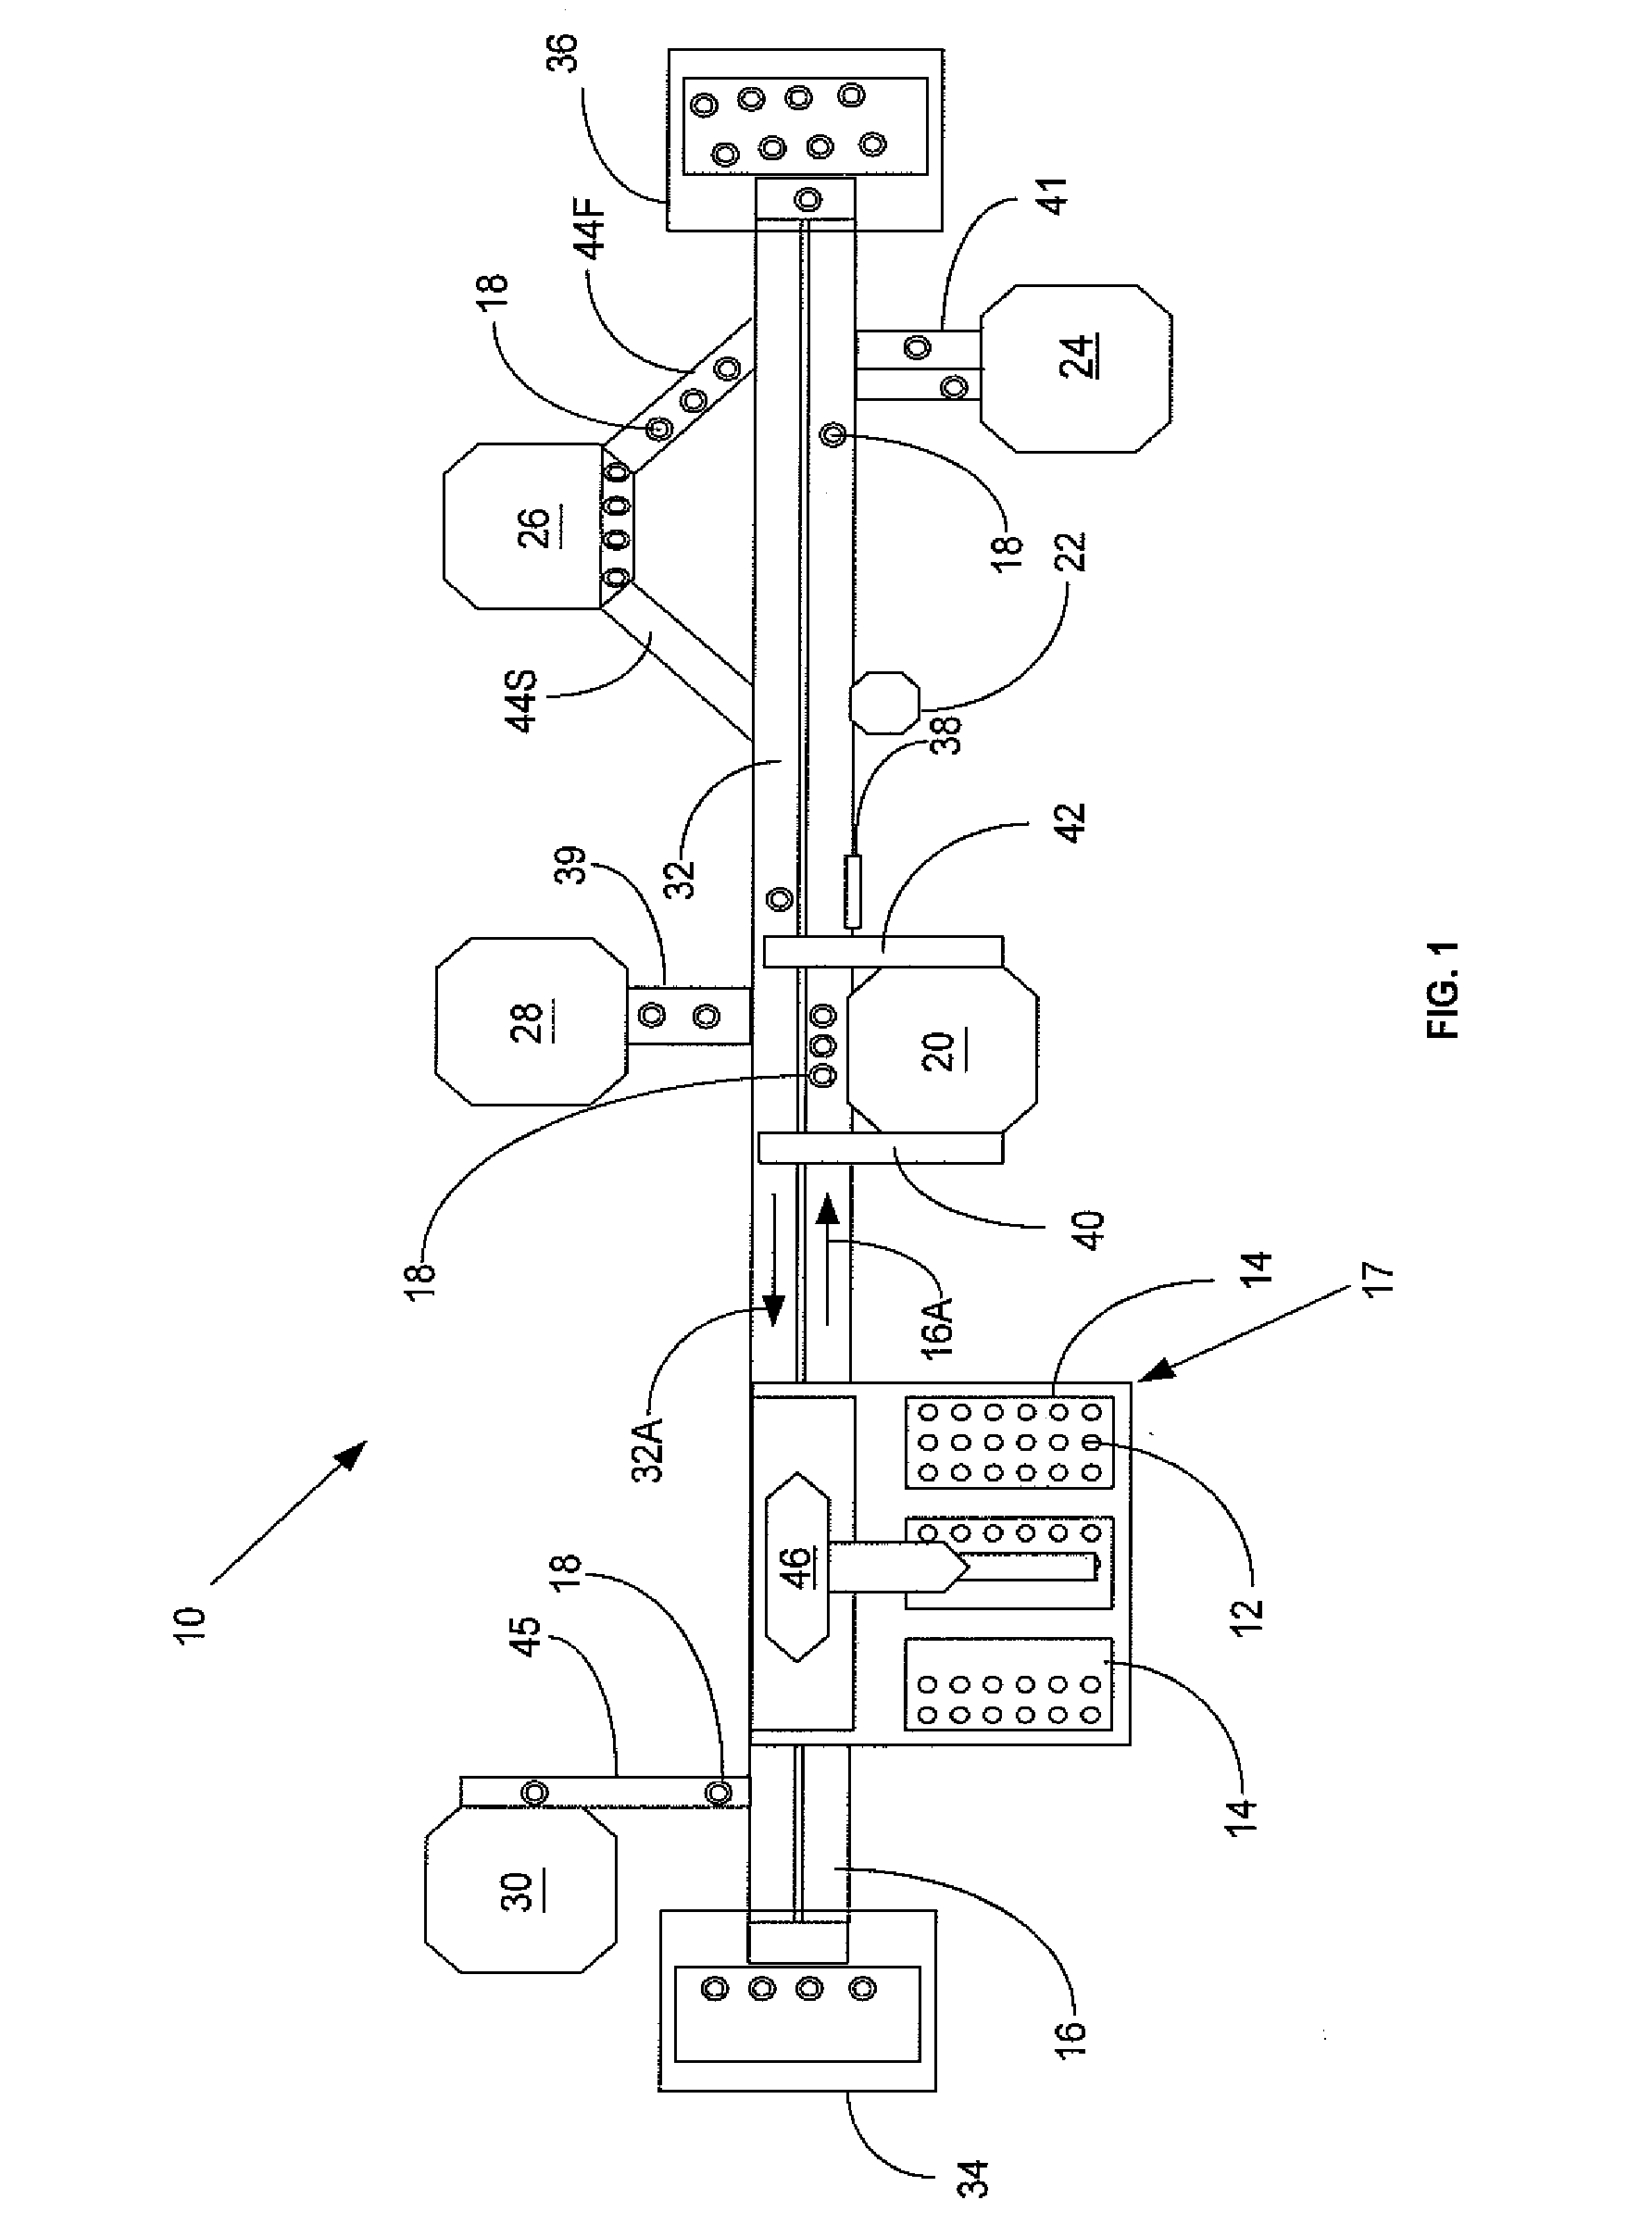 Programmable Random Access Sample Handler For Use Within an Automated Laboratory System